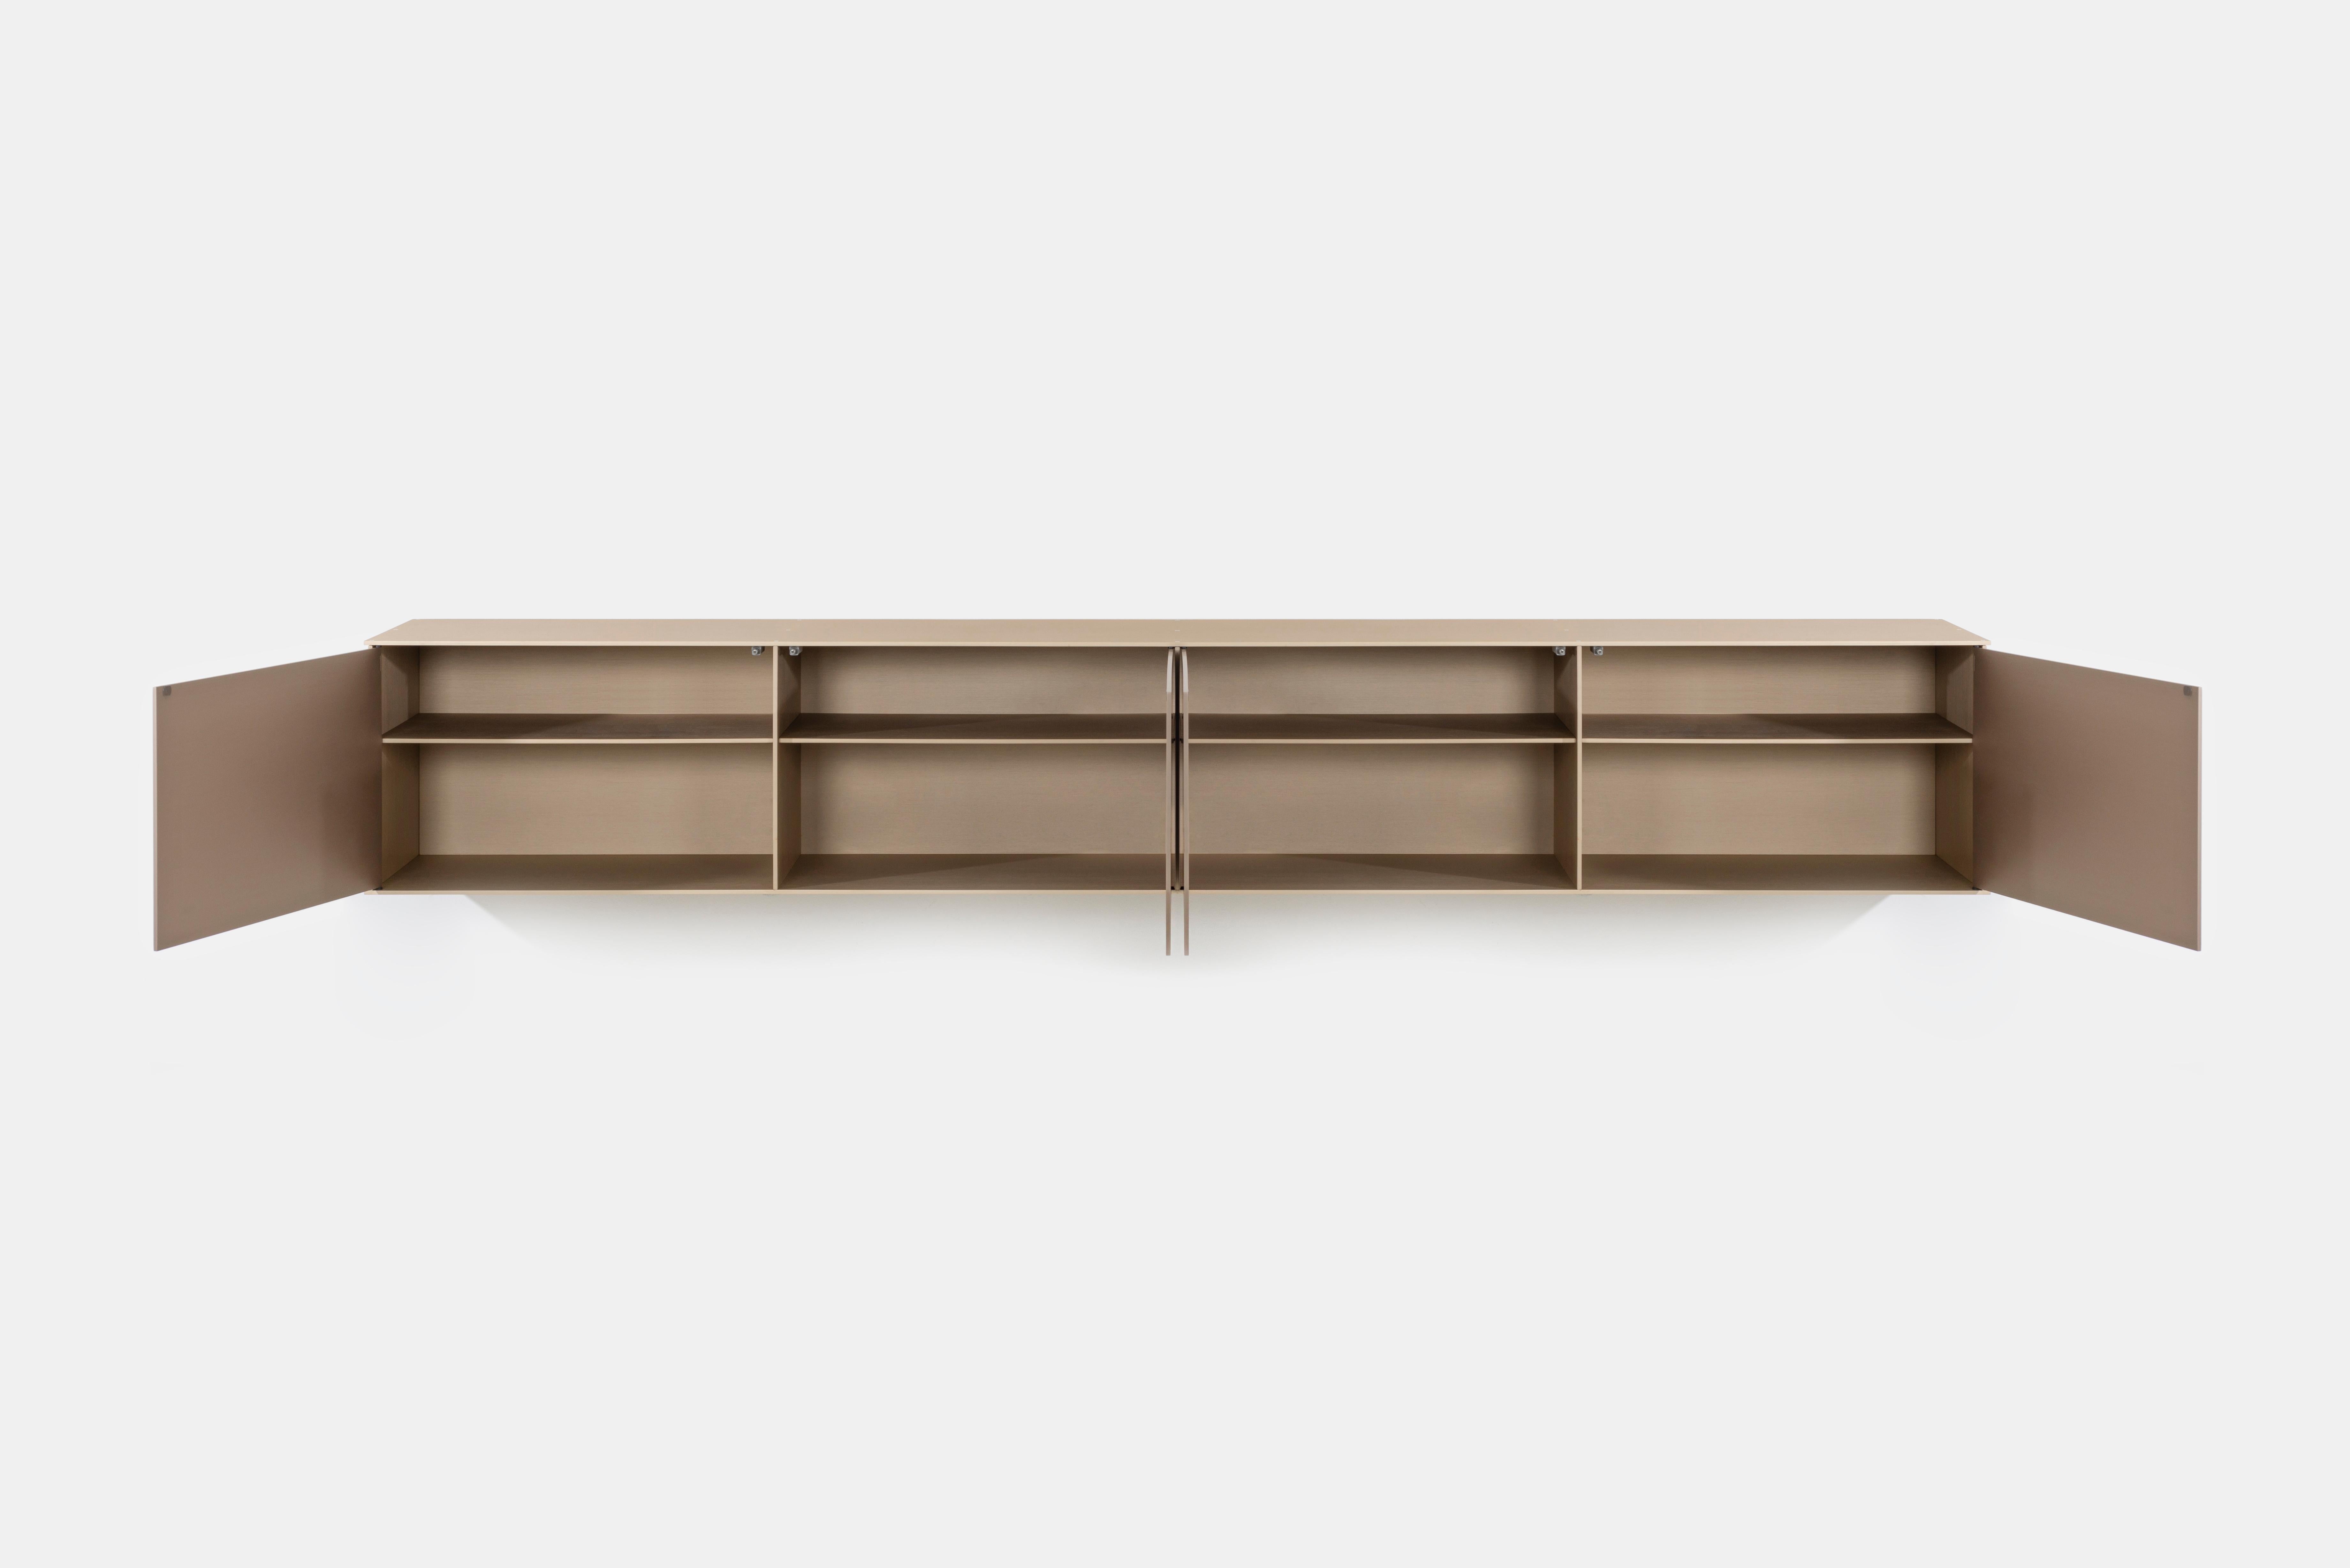 The minimalist wall-mounted 4G shelf is sculpted out of 1/4 inch thick, brushed and anodized. The shelf has an inset bolted U-channel that spans the length of the shelf and easily mounts on included custom-bent steel Z-clips. Each bay of this